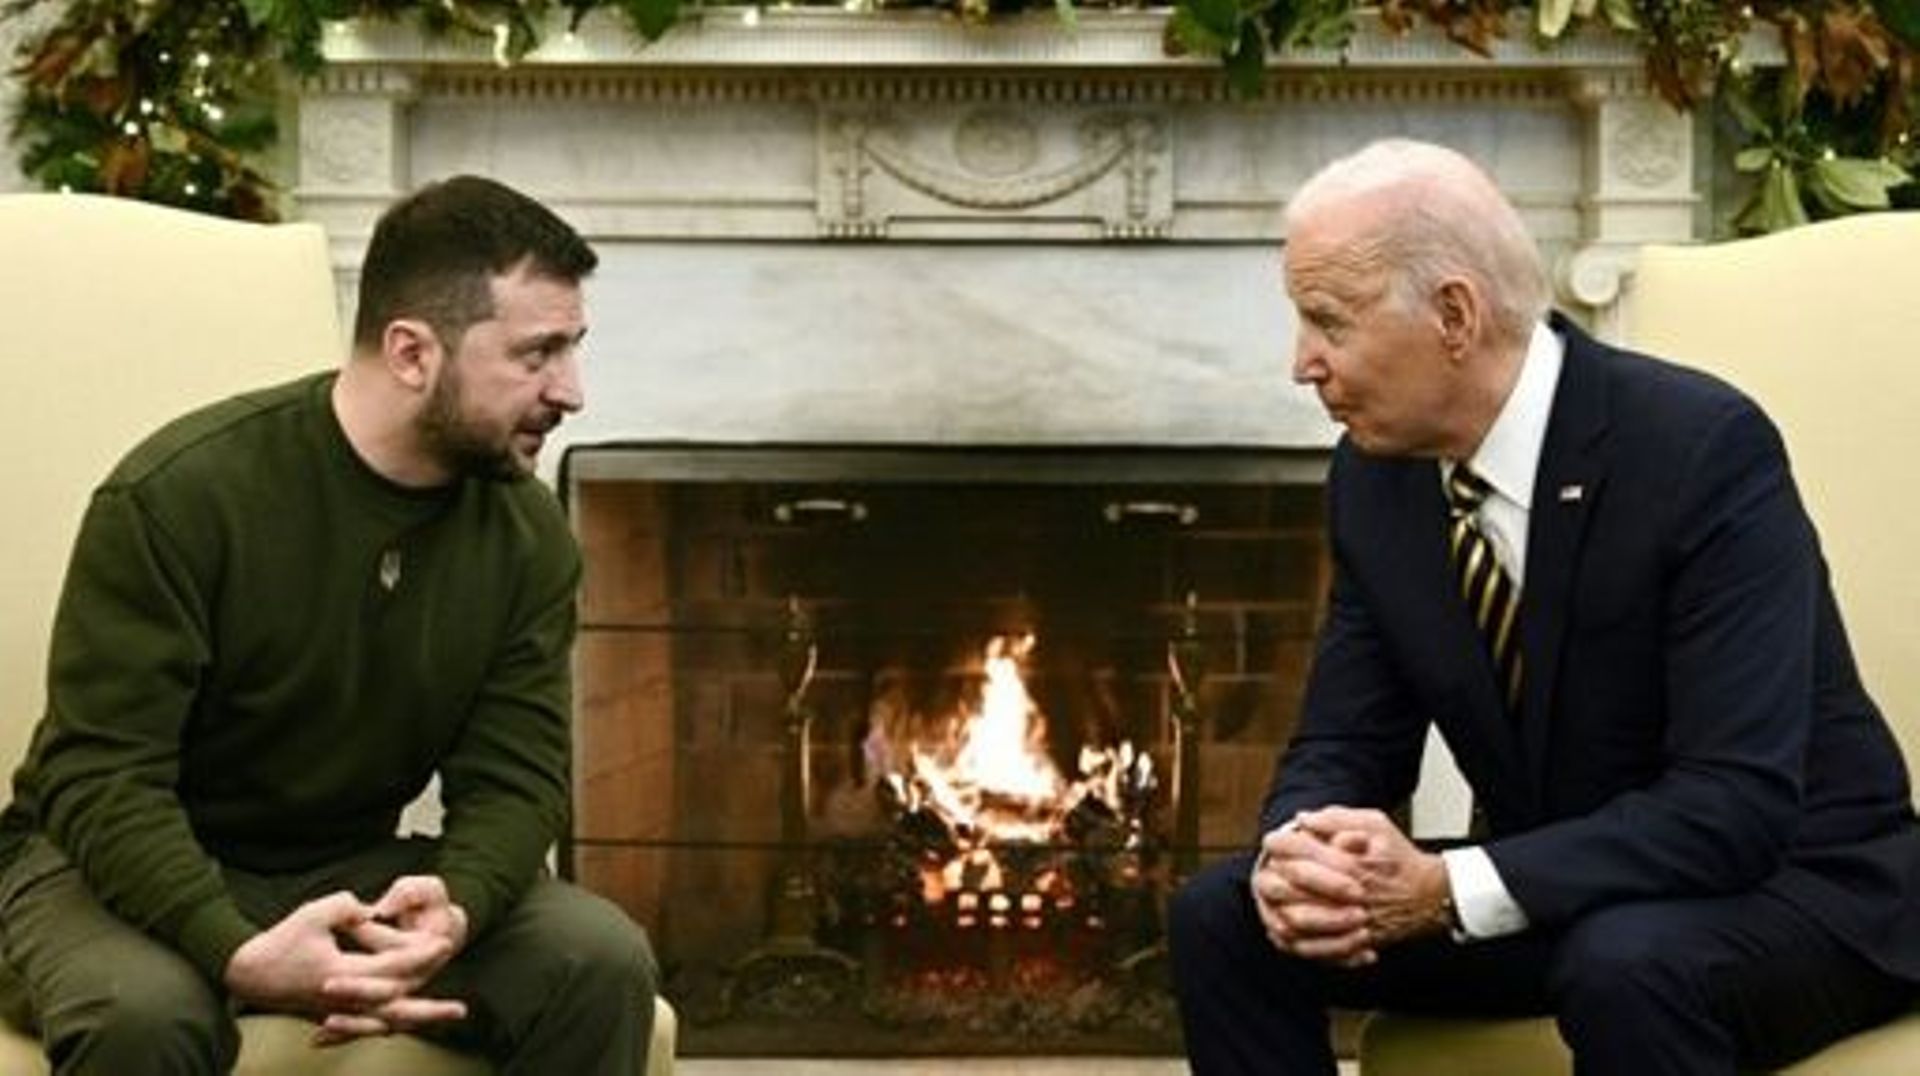 US President Joe Biden and Ukraine's President Volodymyr Zelensky meet in the Oval Office  of the White House, in Washington, DC on December 21, 2022.   Zelensky is in Washington to meet with US President Joe Biden and address Congress -- his first trip a